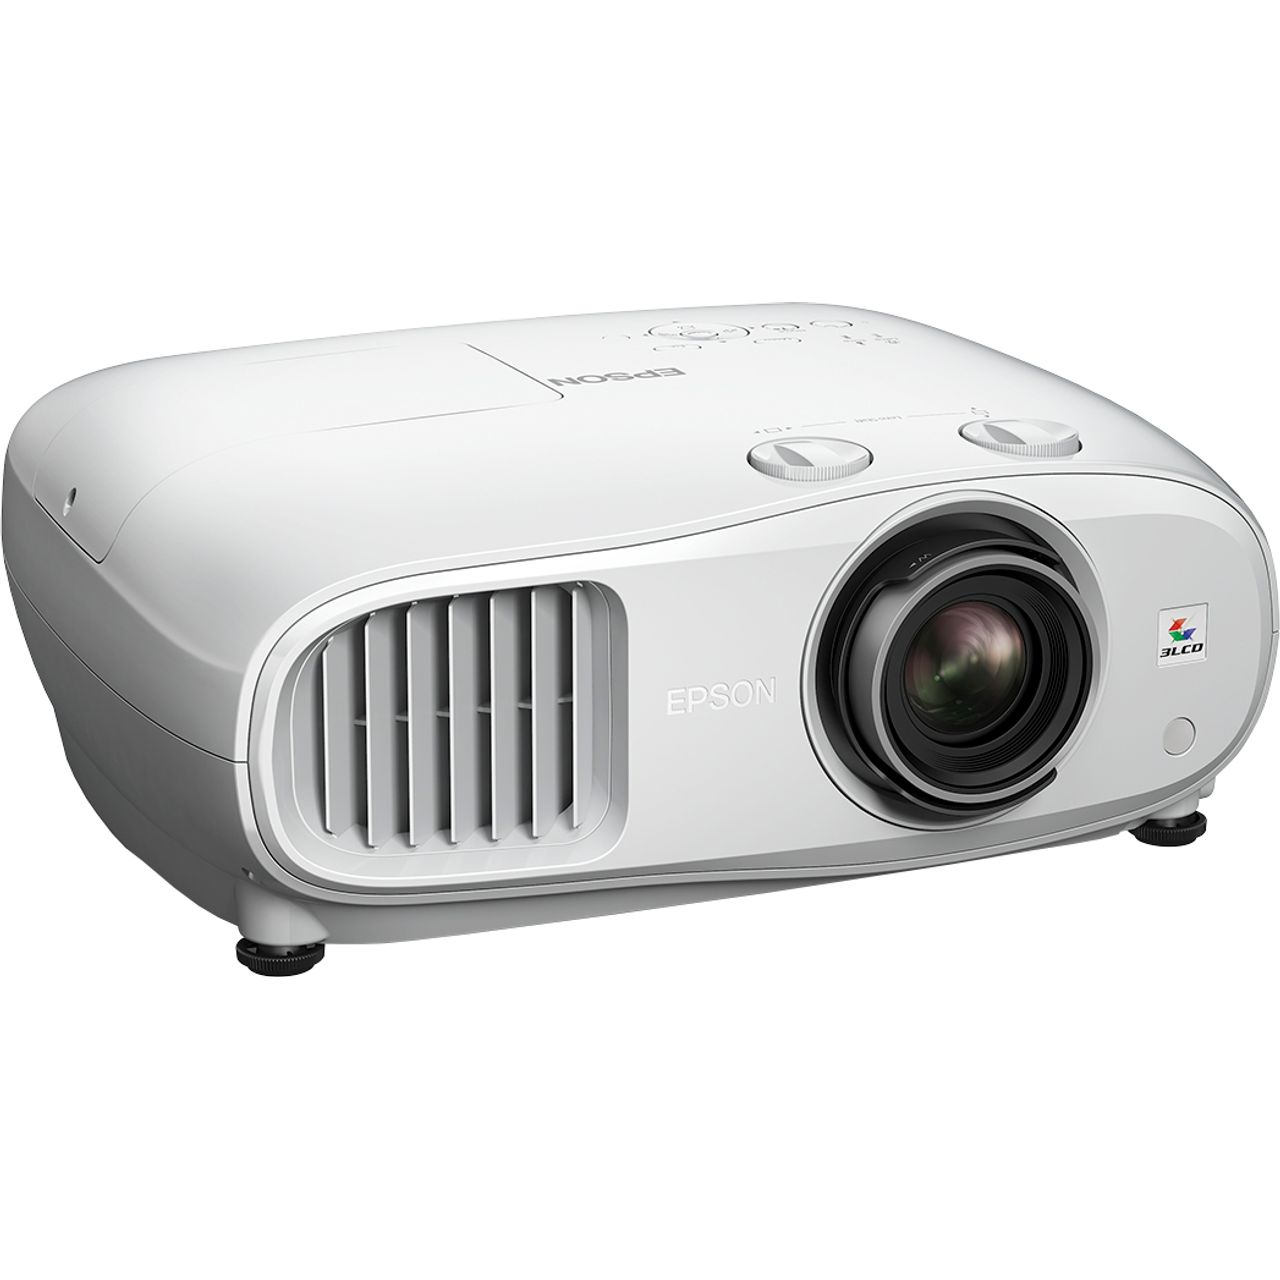 Epson EH-TW7000 Projector Review